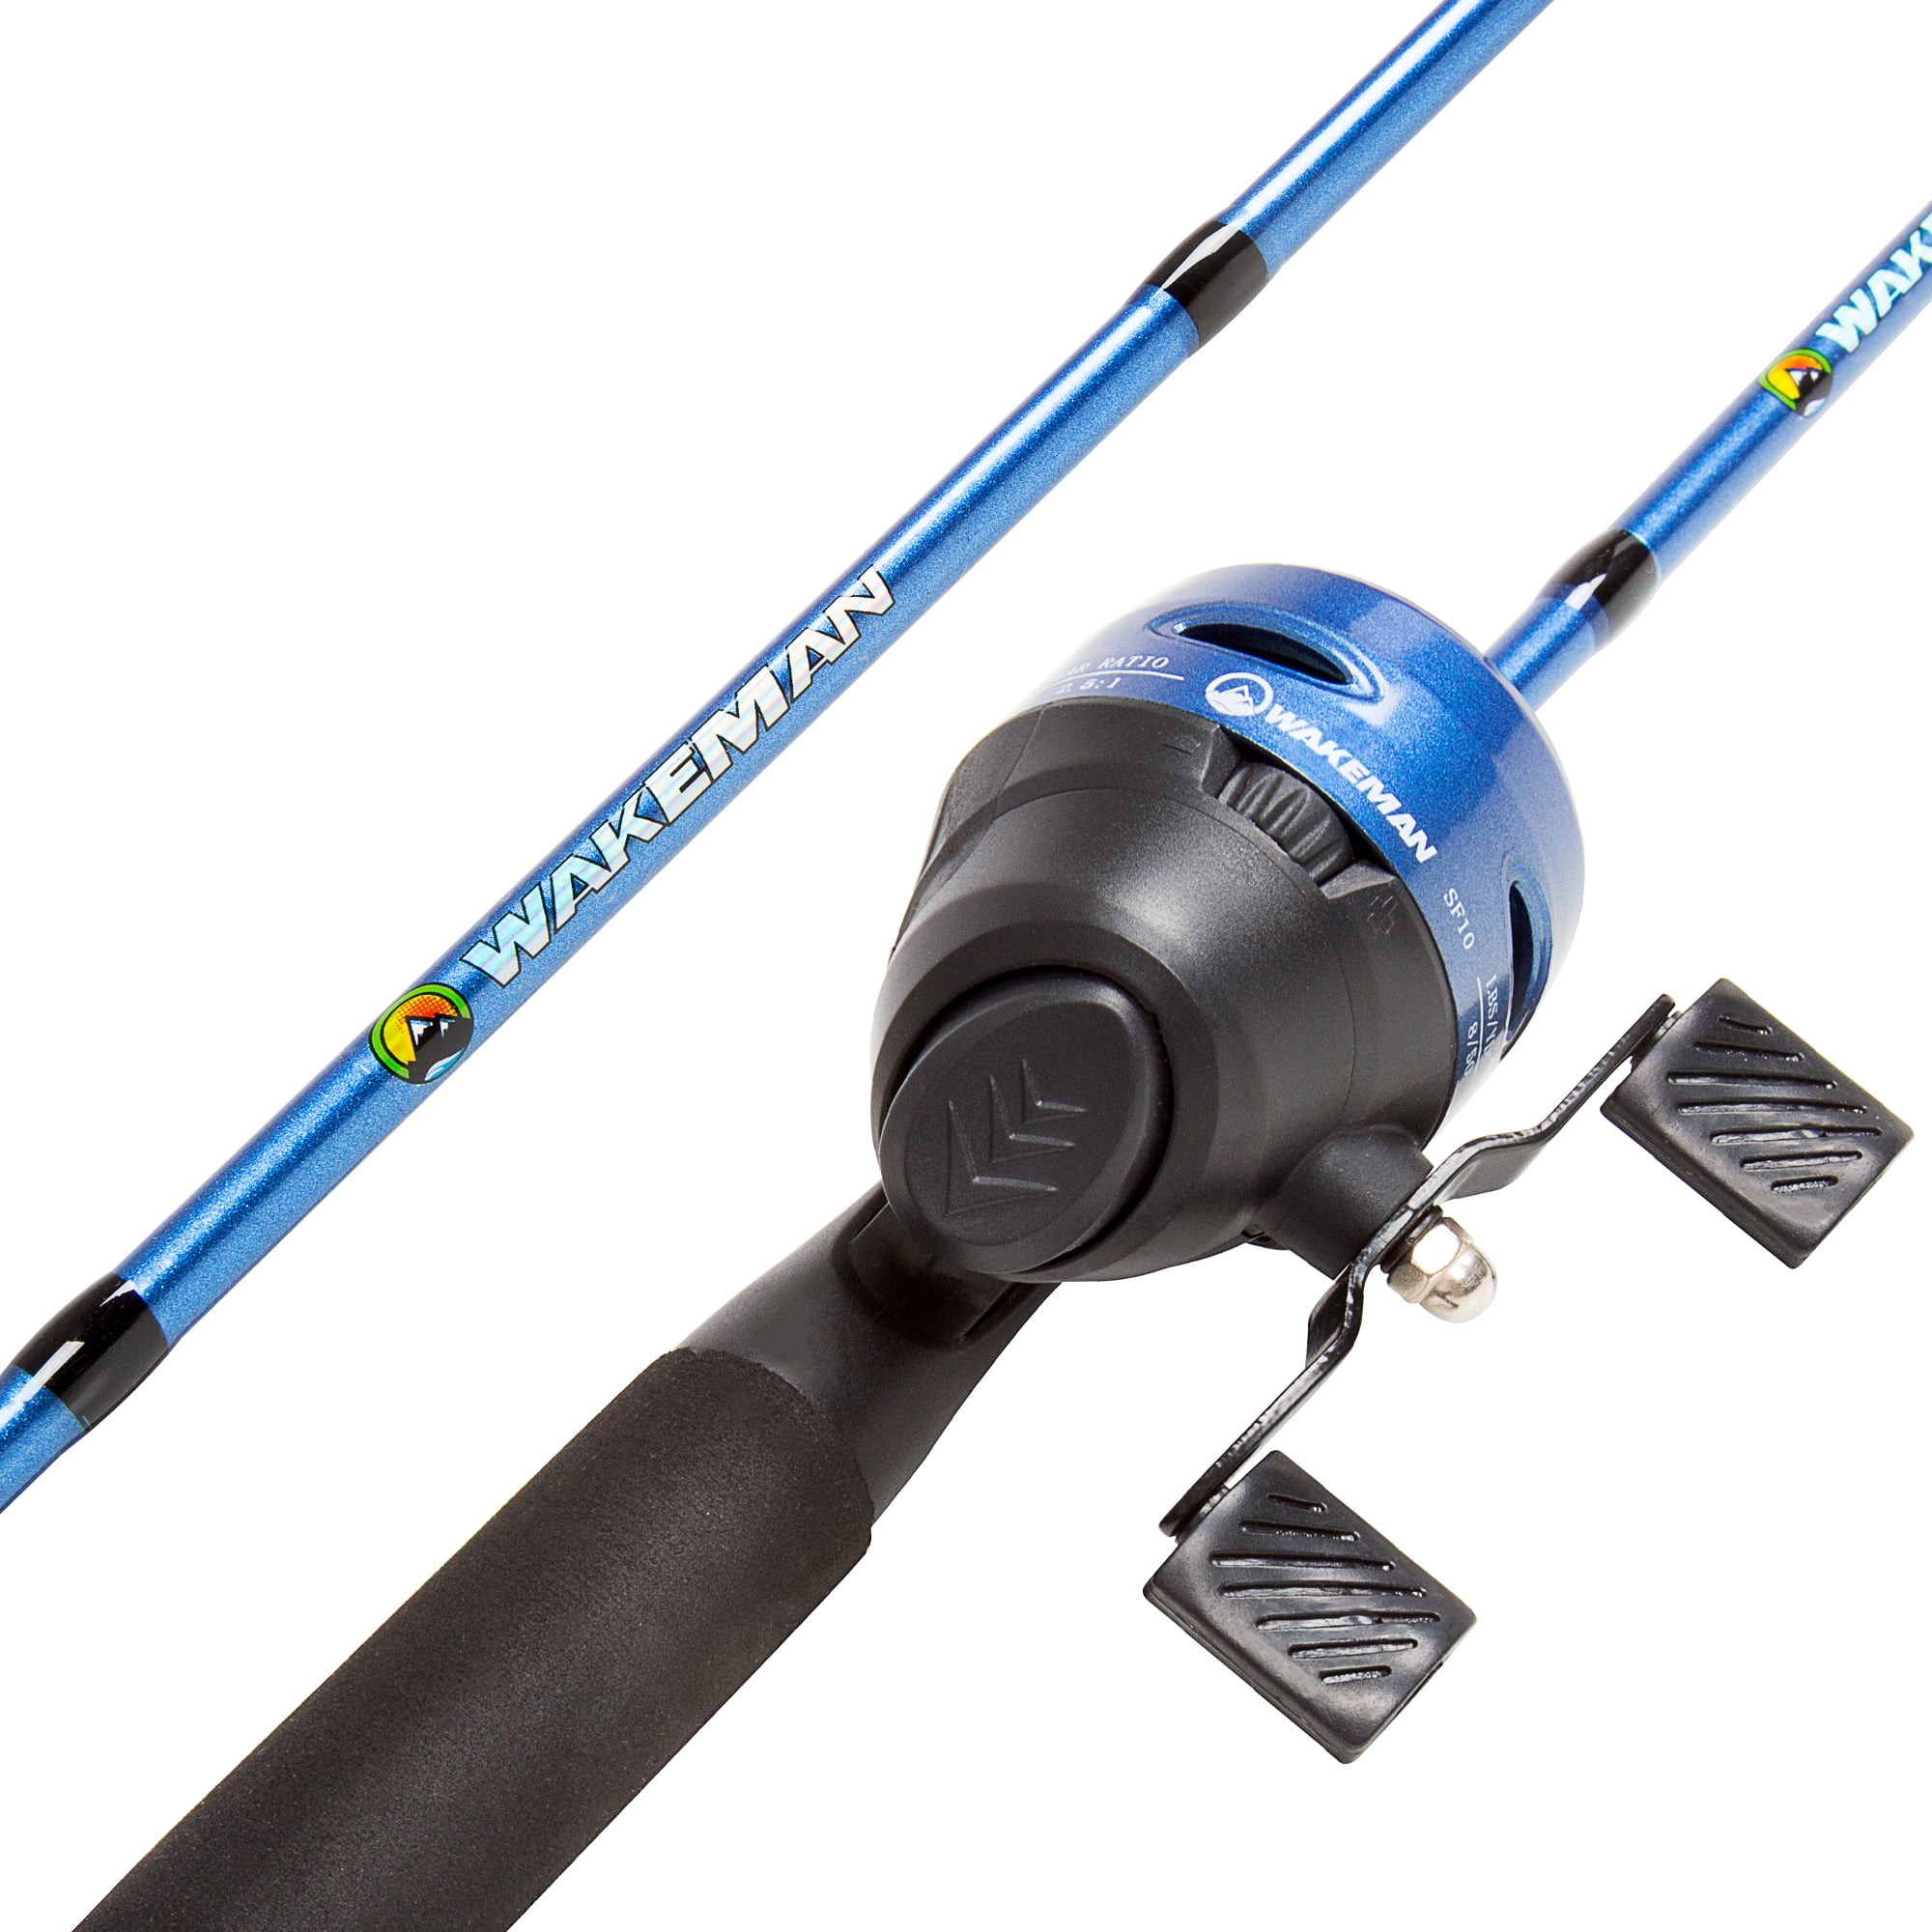 Wakeman 64-Inch Fiberglass and Stainless Steel Rod and Pre-Spooled Reel  Combo (Green Metallic; Green) 